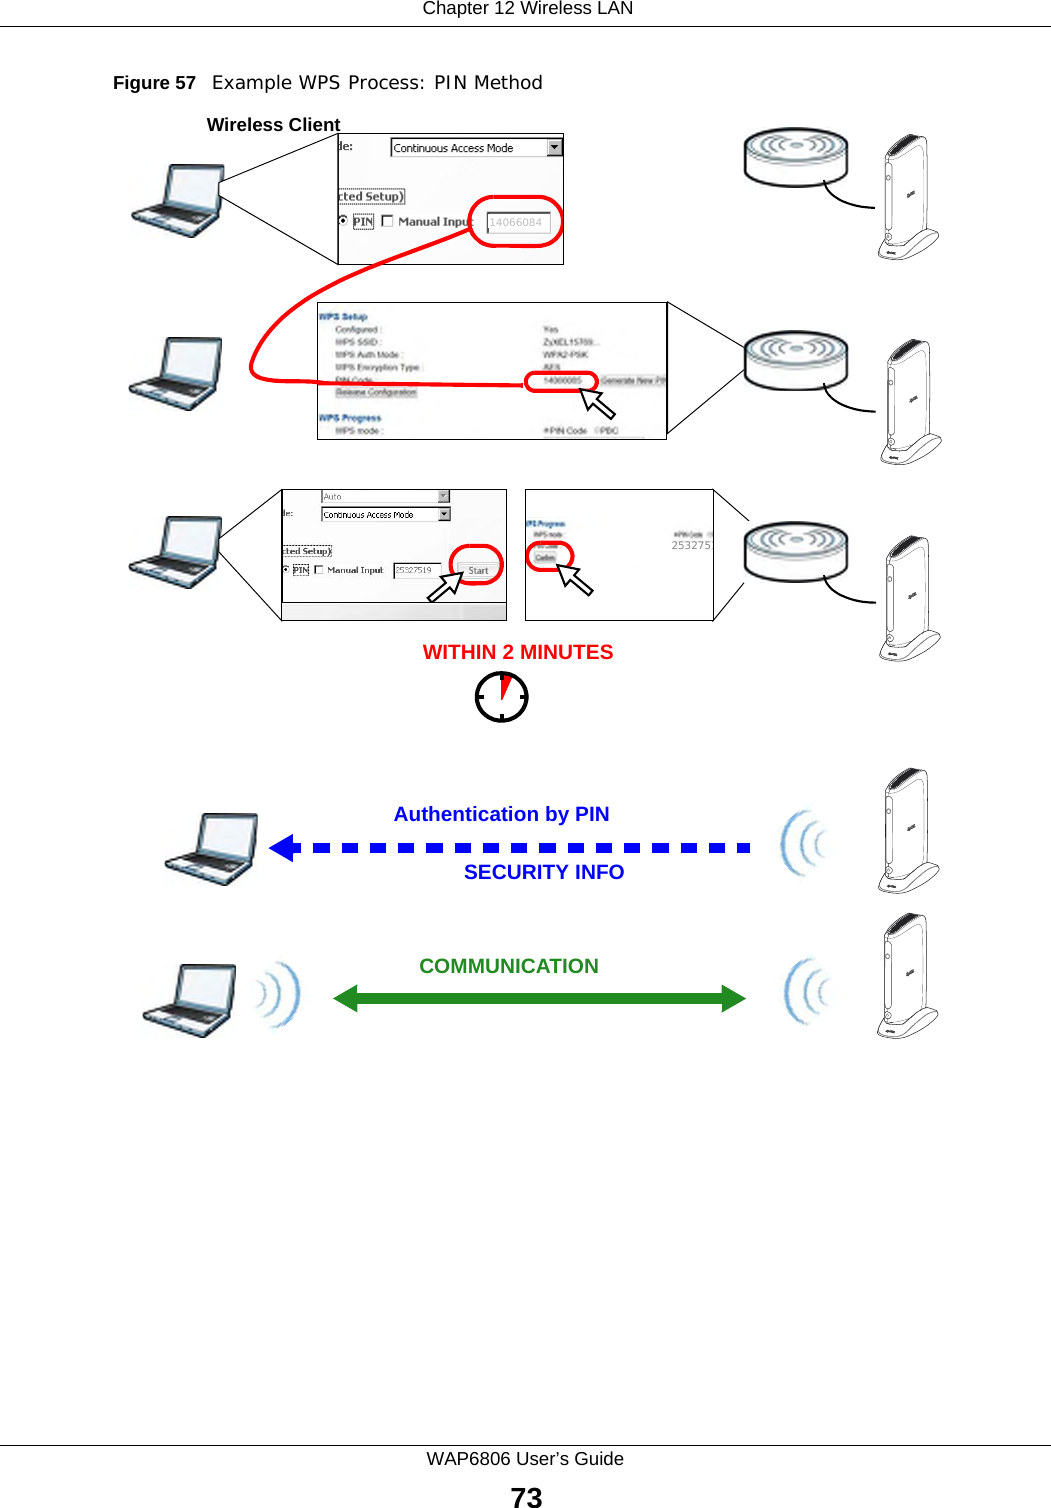  Chapter 12 Wireless LANWAP6806 User’s Guide73Figure 57   Example WPS Process: PIN MethodAuthentication by PINSECURITY INFOWITHIN 2 MINUTESWireless ClientCOMMUNICATION253275114066084